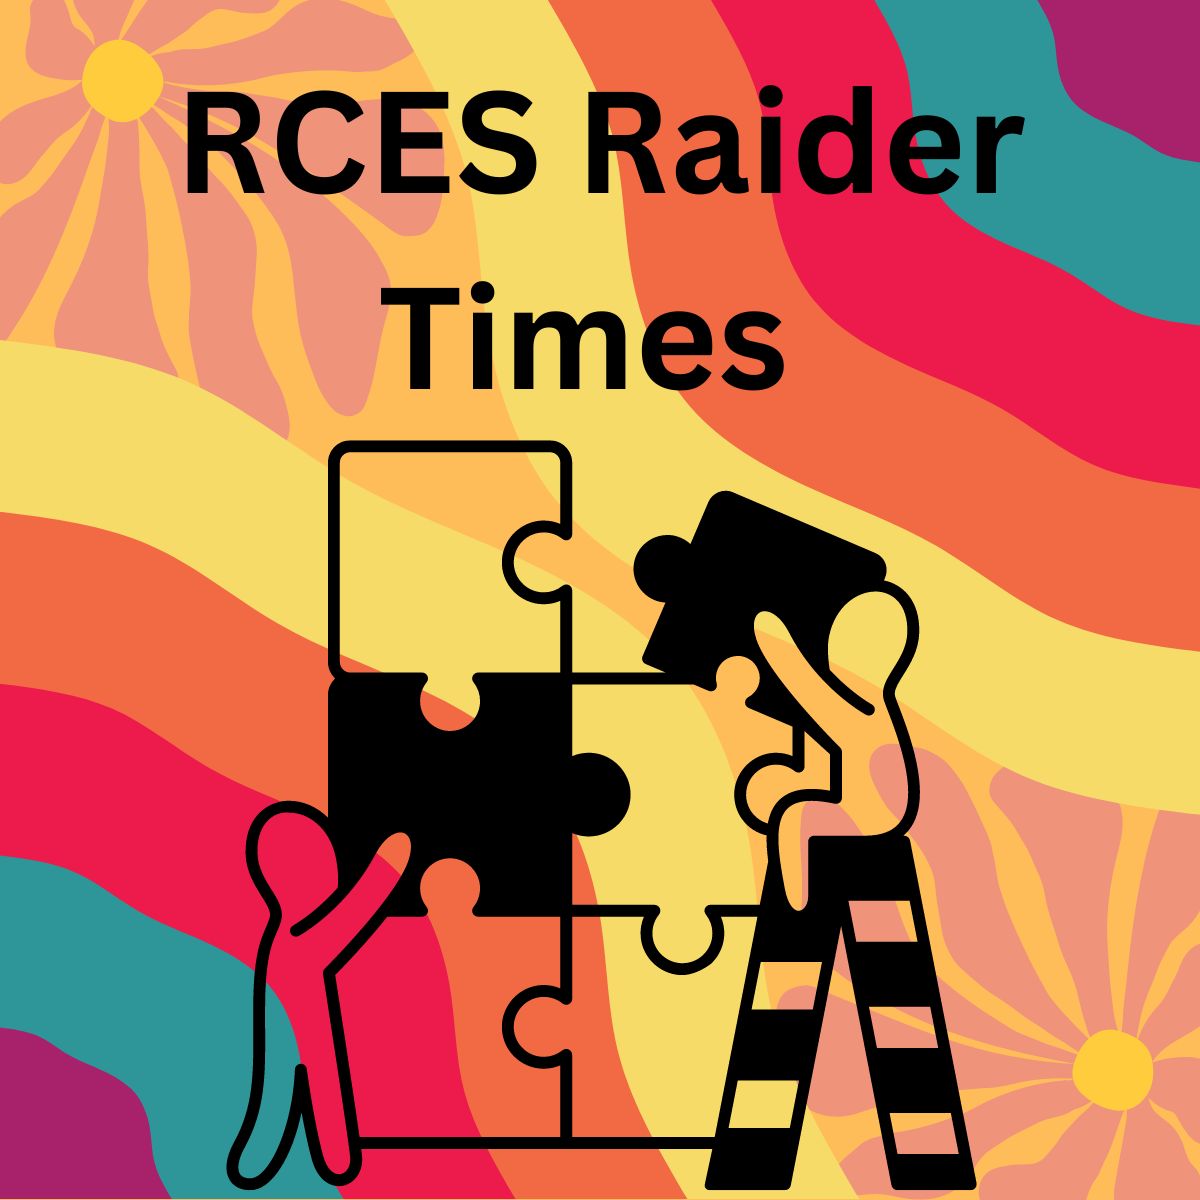 RCES Raider Times March